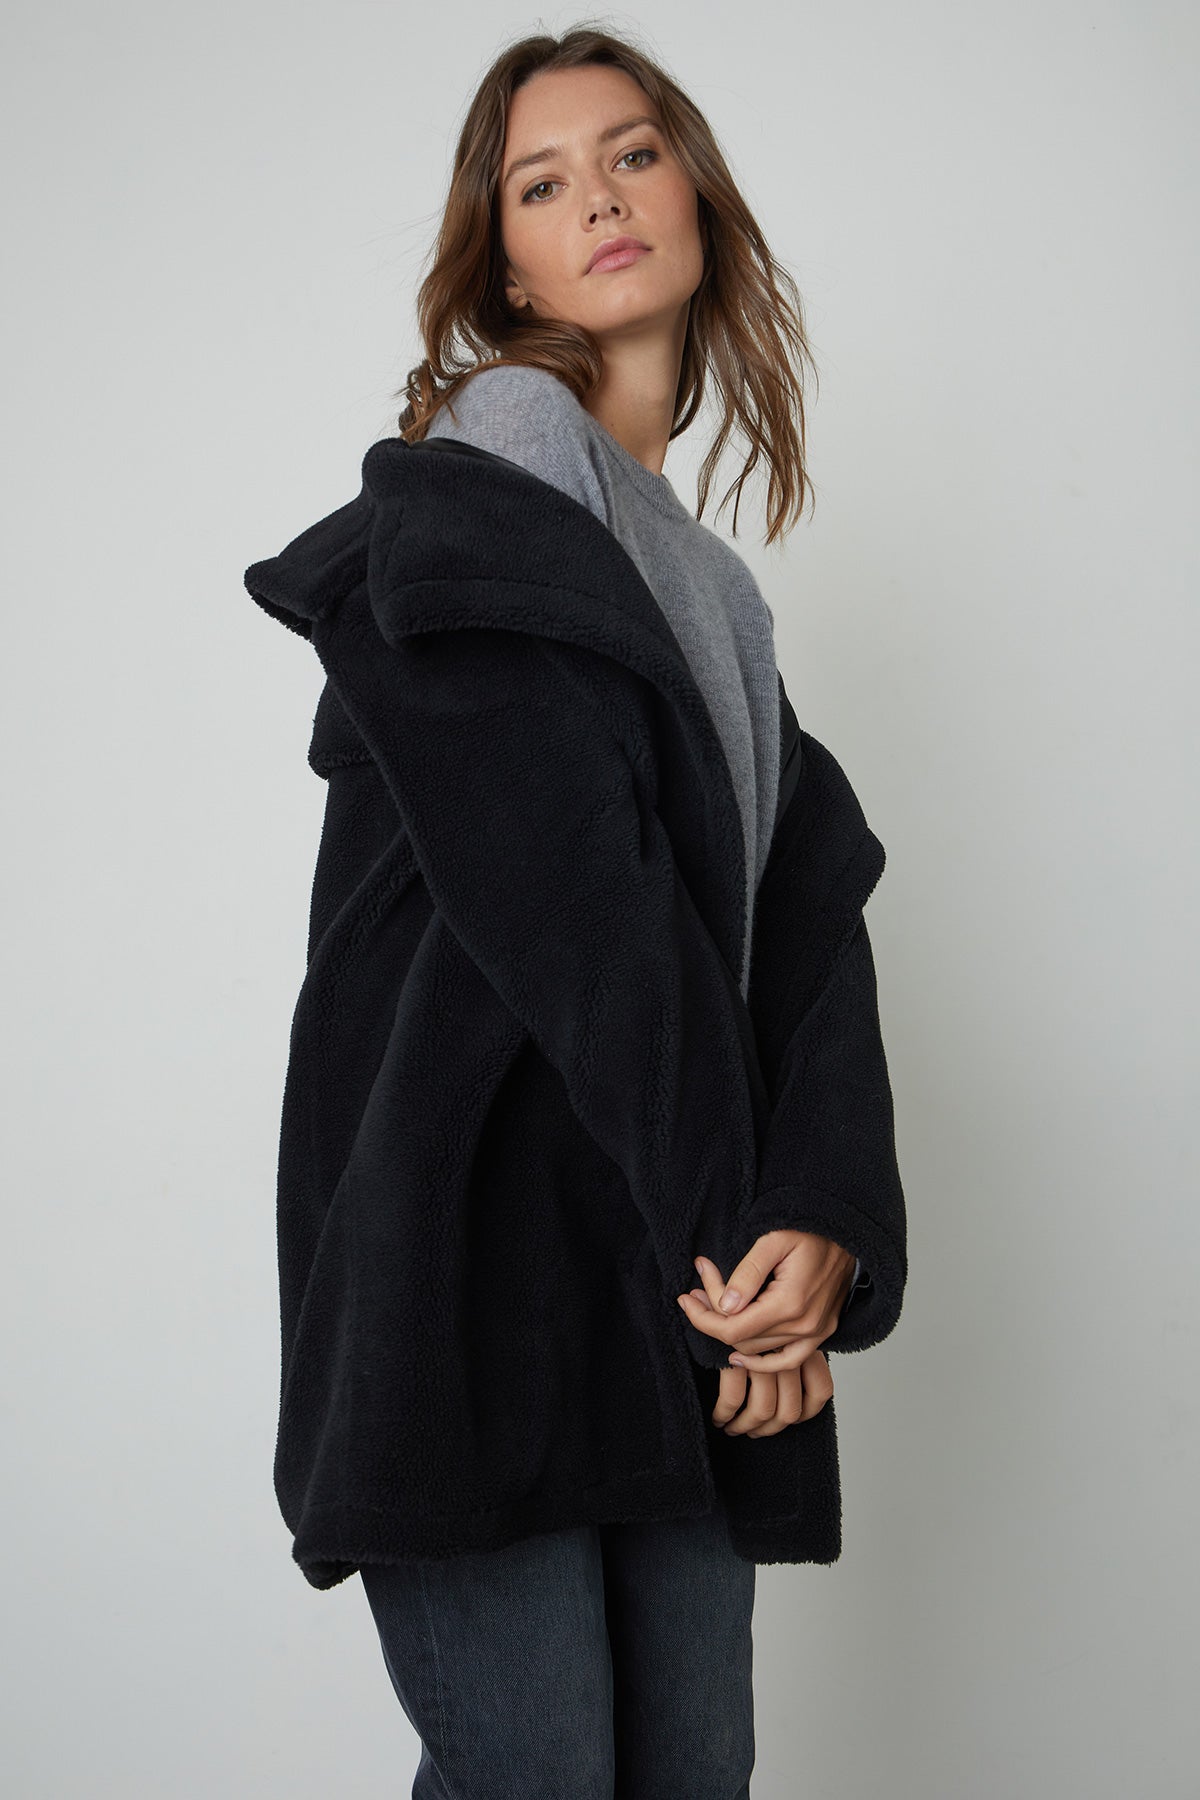   Christine Faux Sherpa Coat in Black Side with Brynne Sweater in Heather Grey 